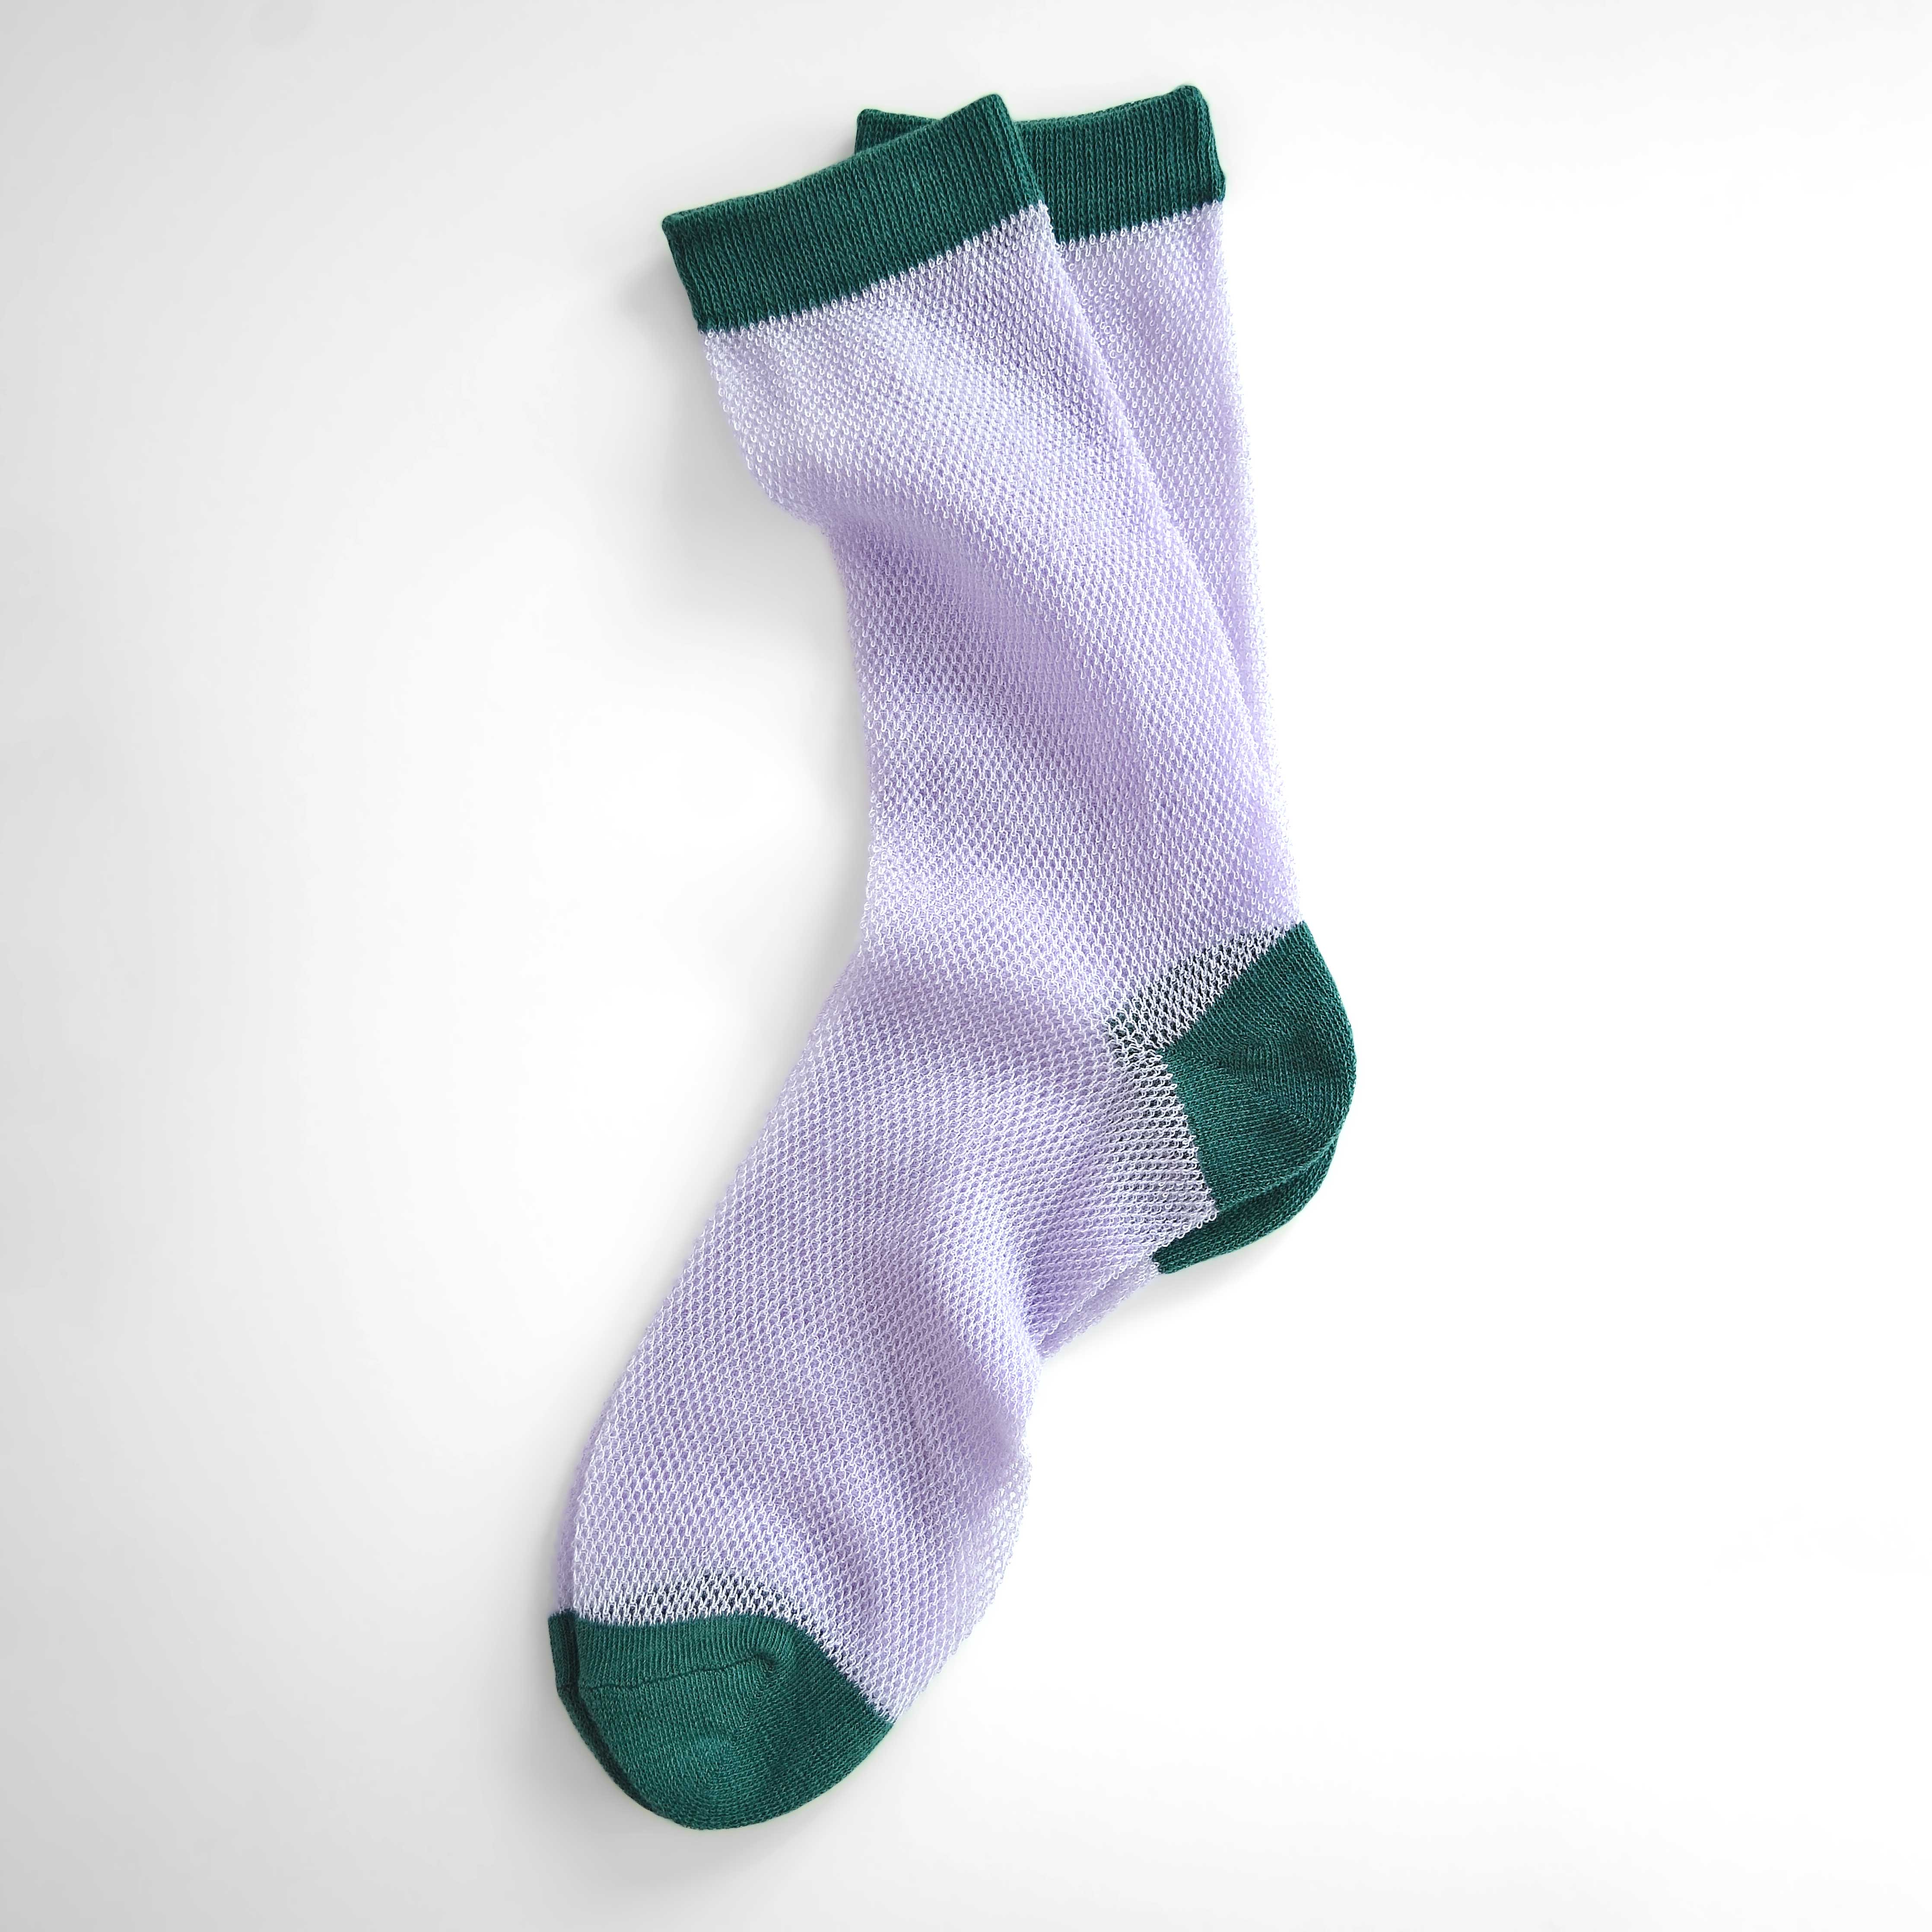 'Valencia' mid-crew socks, showcasing an open mesh sheer design in Cantaloupe, Pink, and Purple, effortlessly blending breathability and chic style. Size: Small (US women’s shoe size: 4-8)